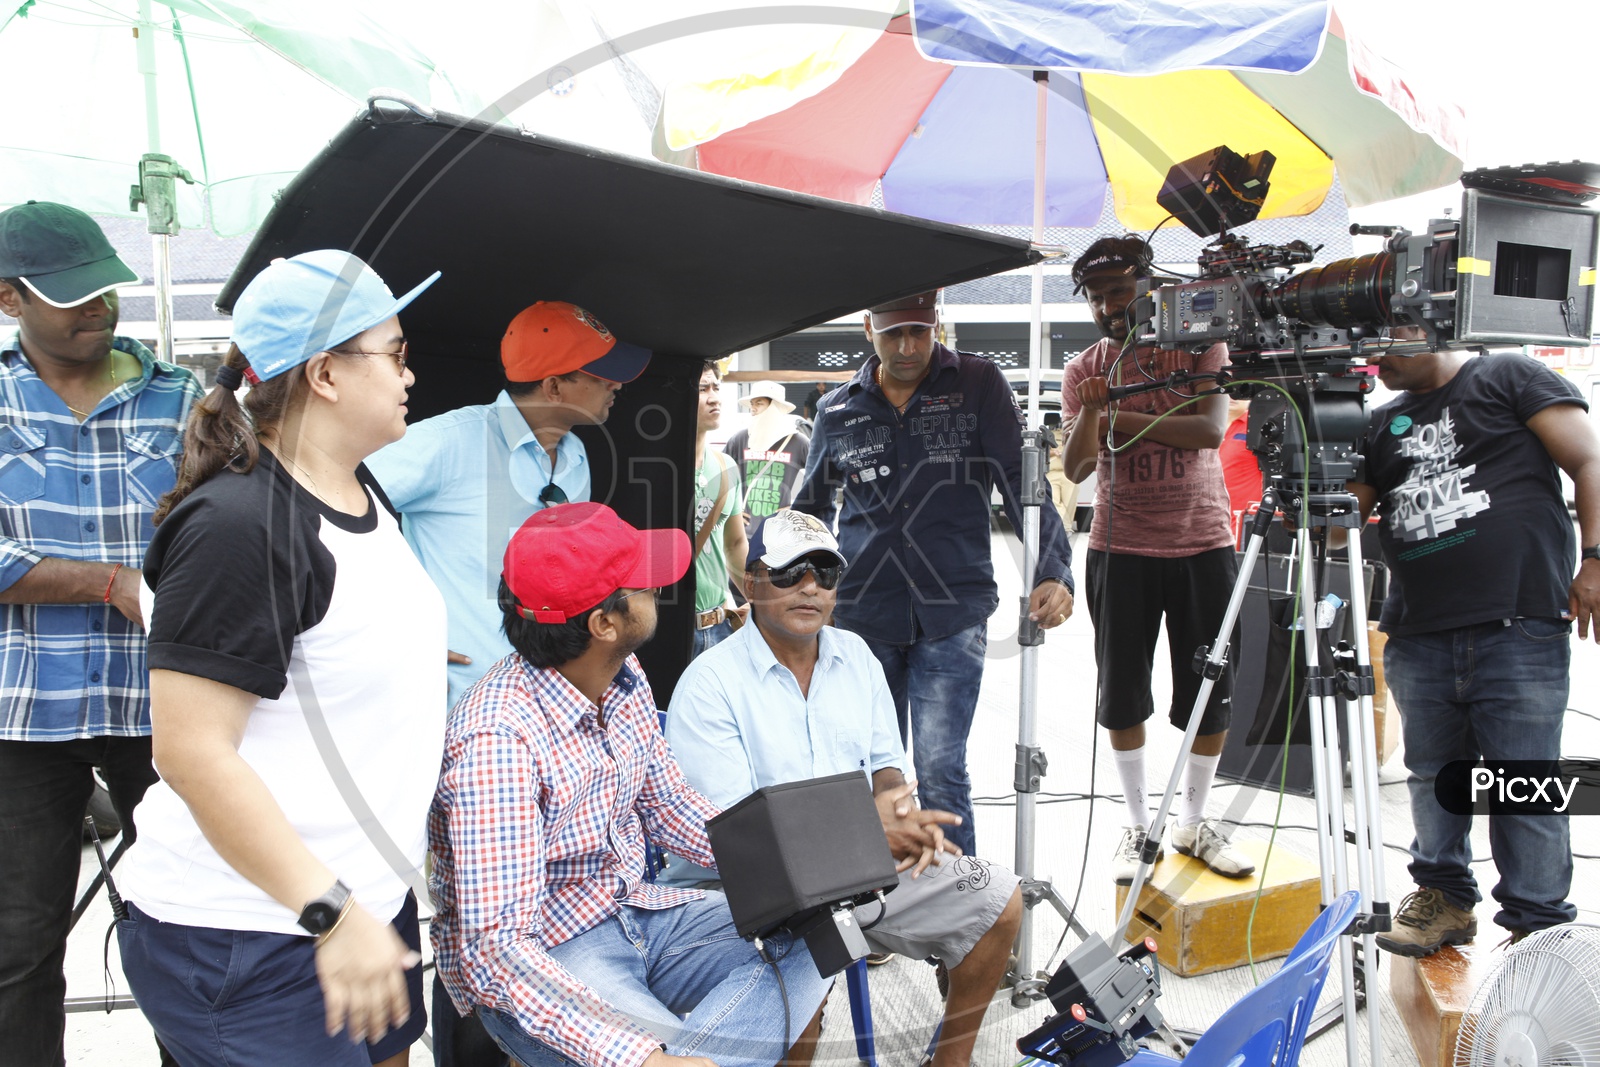 Movie Shooting Scenes With Camera And technicians